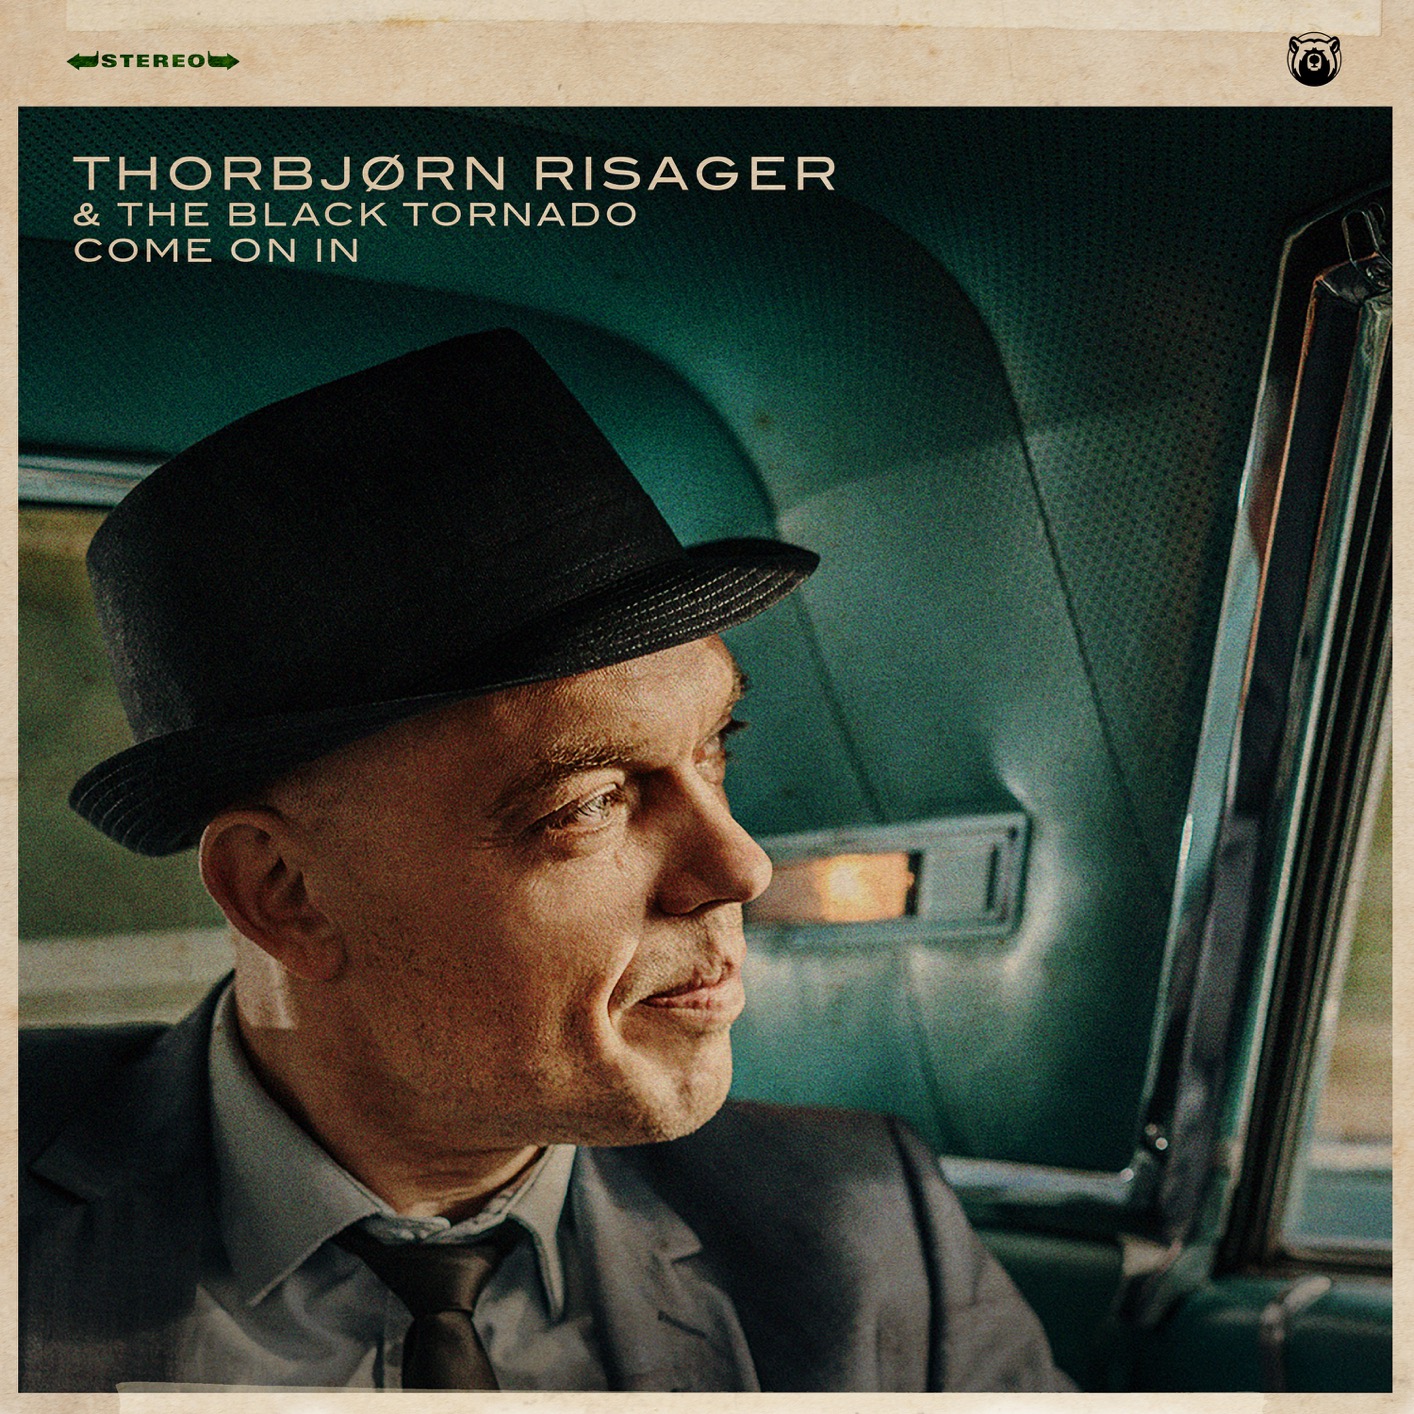 Thorbjorn Risager & The Black Tornado - Come On In (2020) [FLAC 24bit/48kHz]